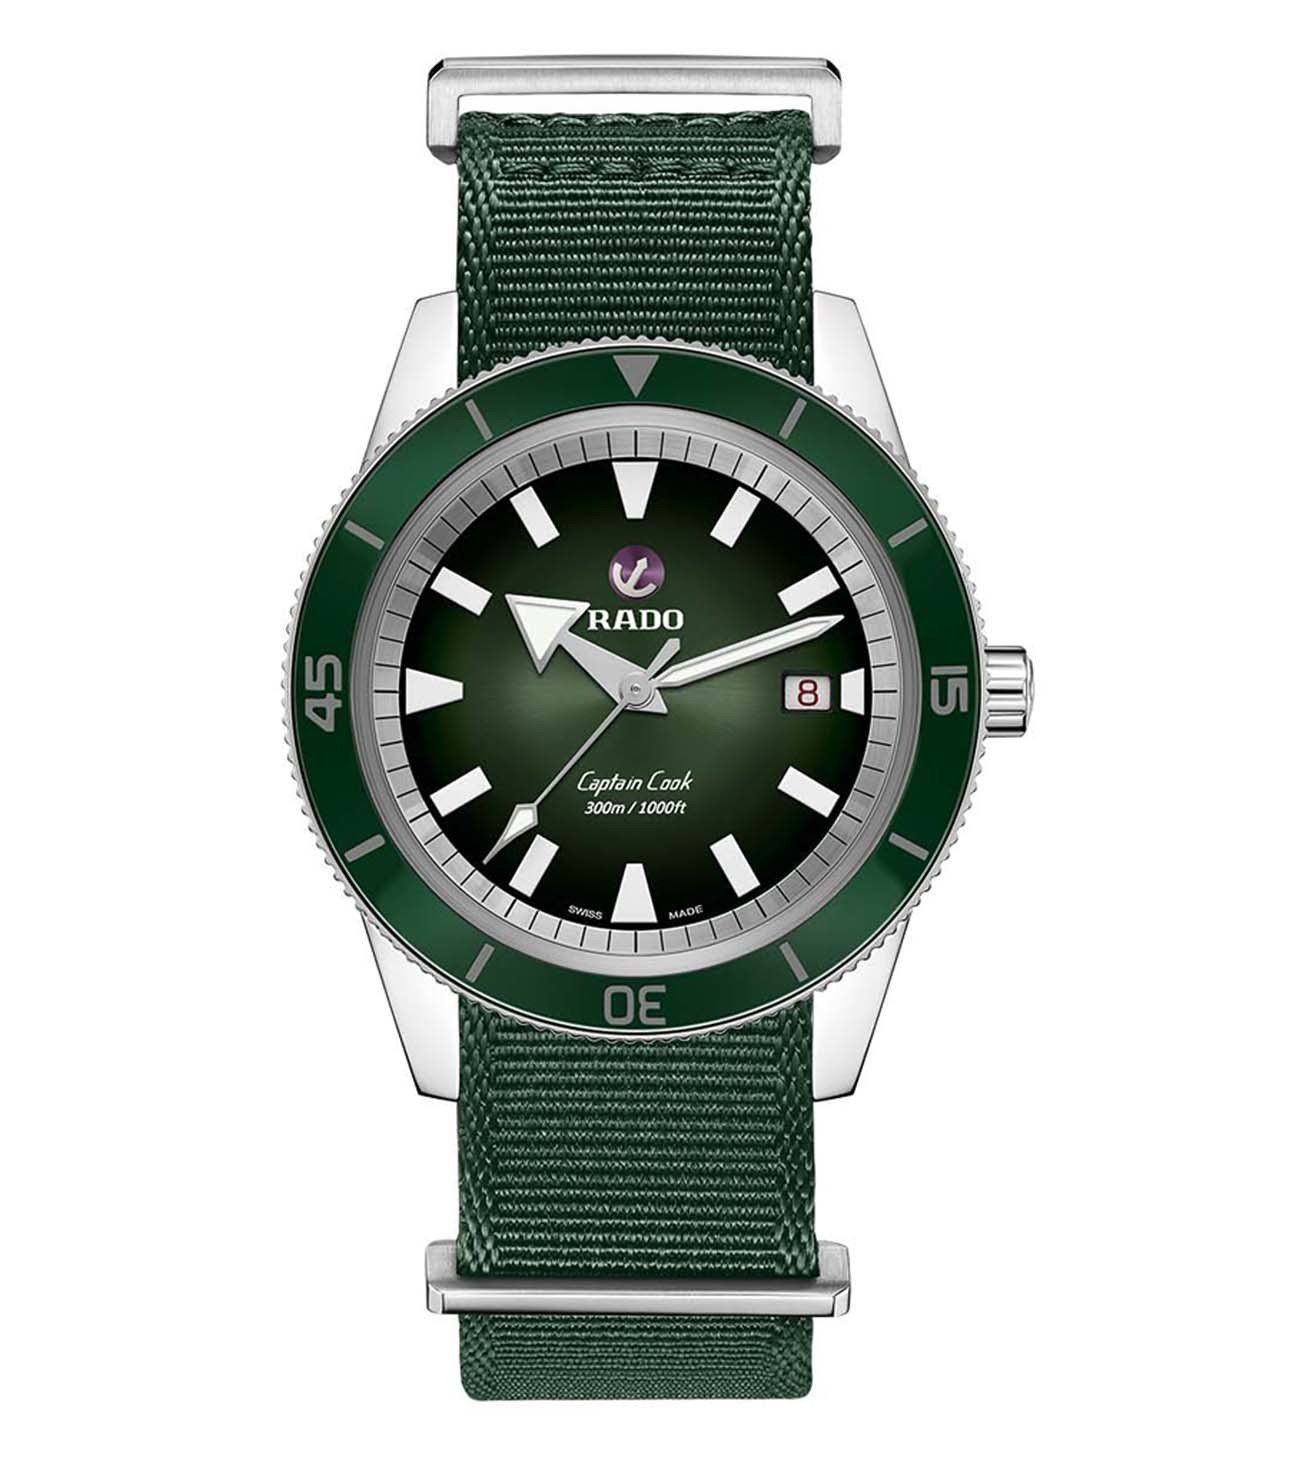 R32105319 | RADO Captain Cook Automatic - Hrithik Roshan Edition Watch for Men (2 Additional Straps)